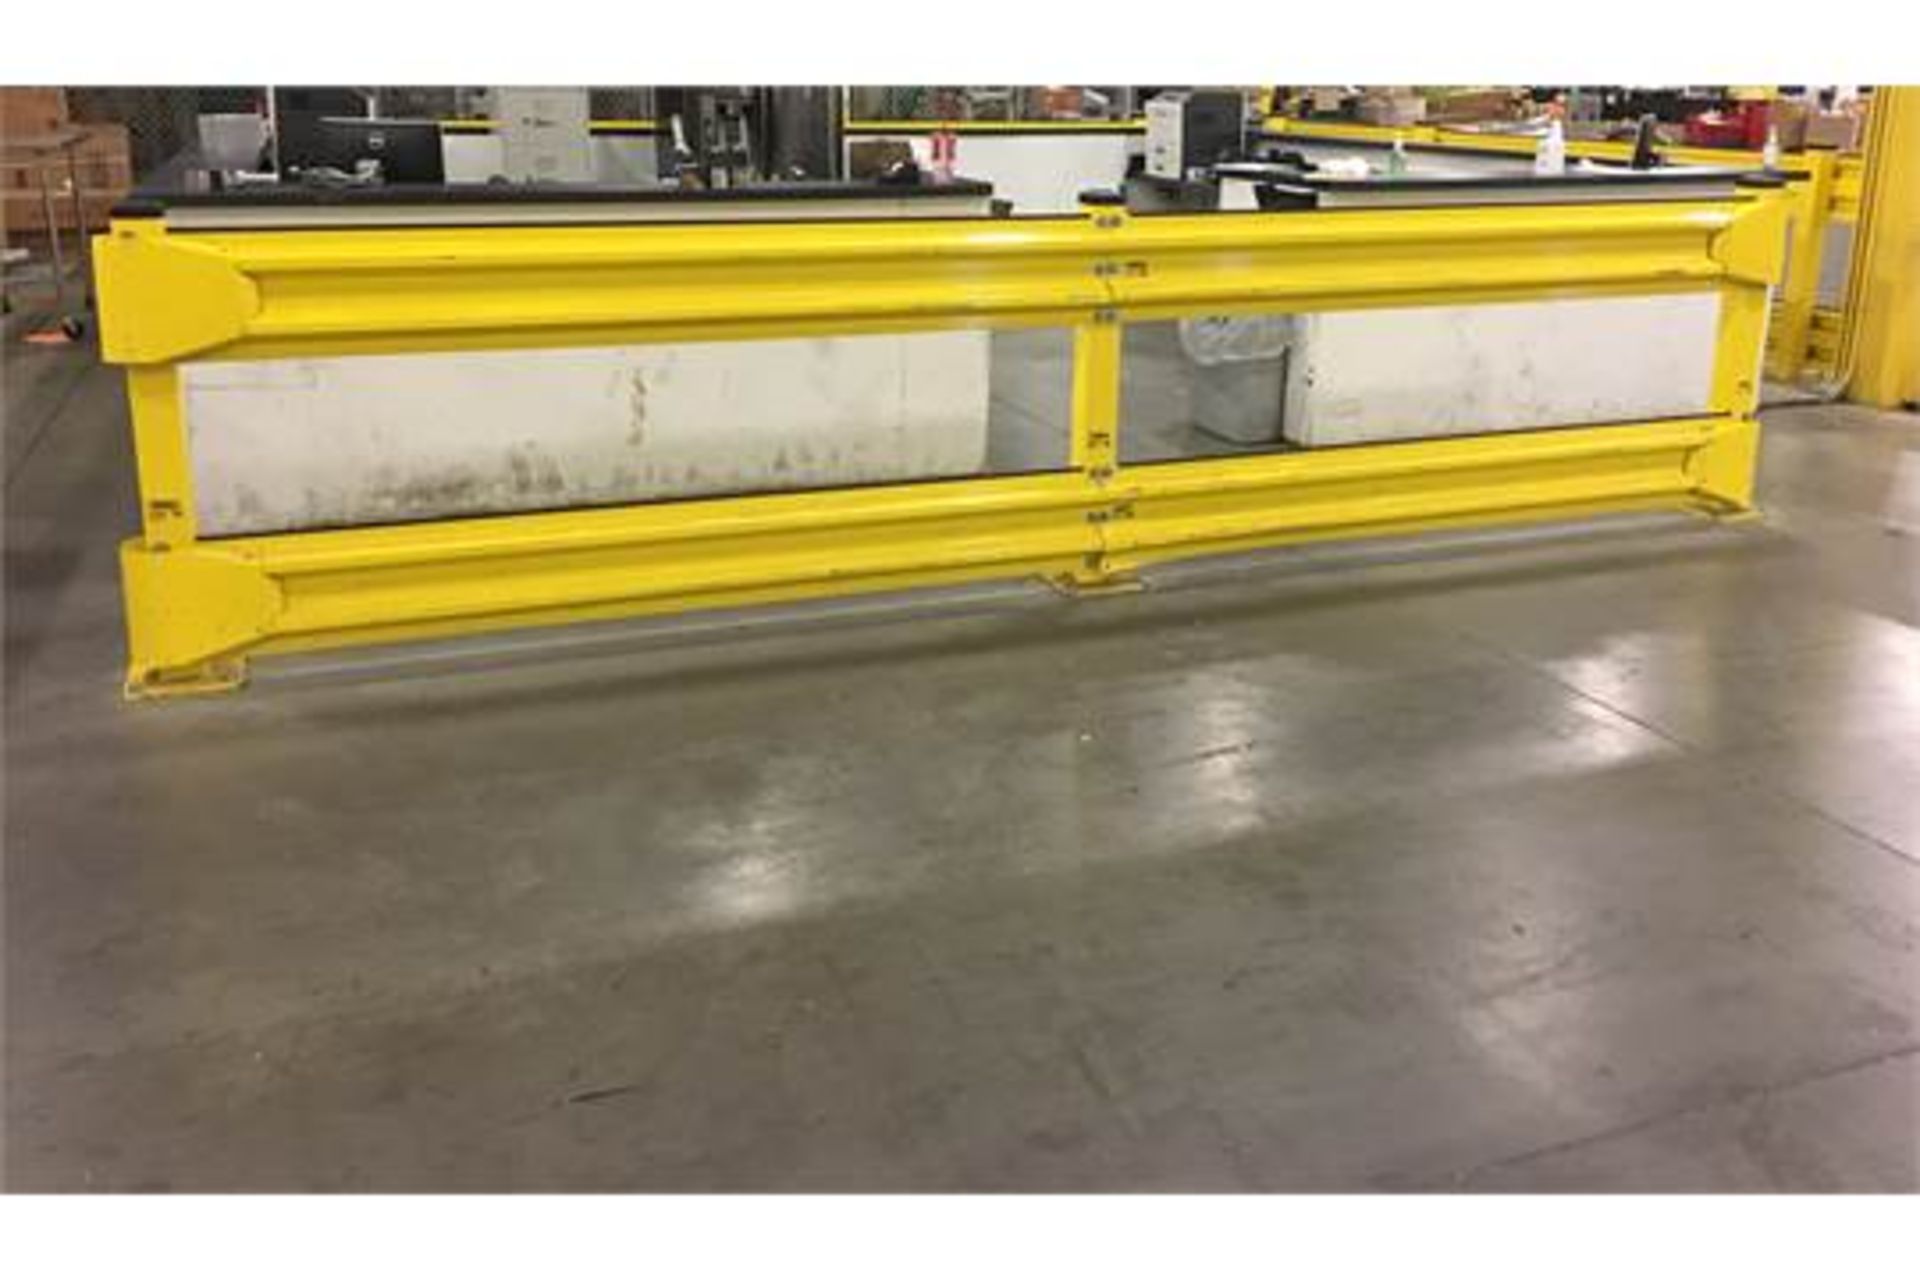 OMEGA INDUSTRIAL PRODUCT SAFETY GUARD RAIL, L-SHAPE 41 FT TOTAL - Image 2 of 2